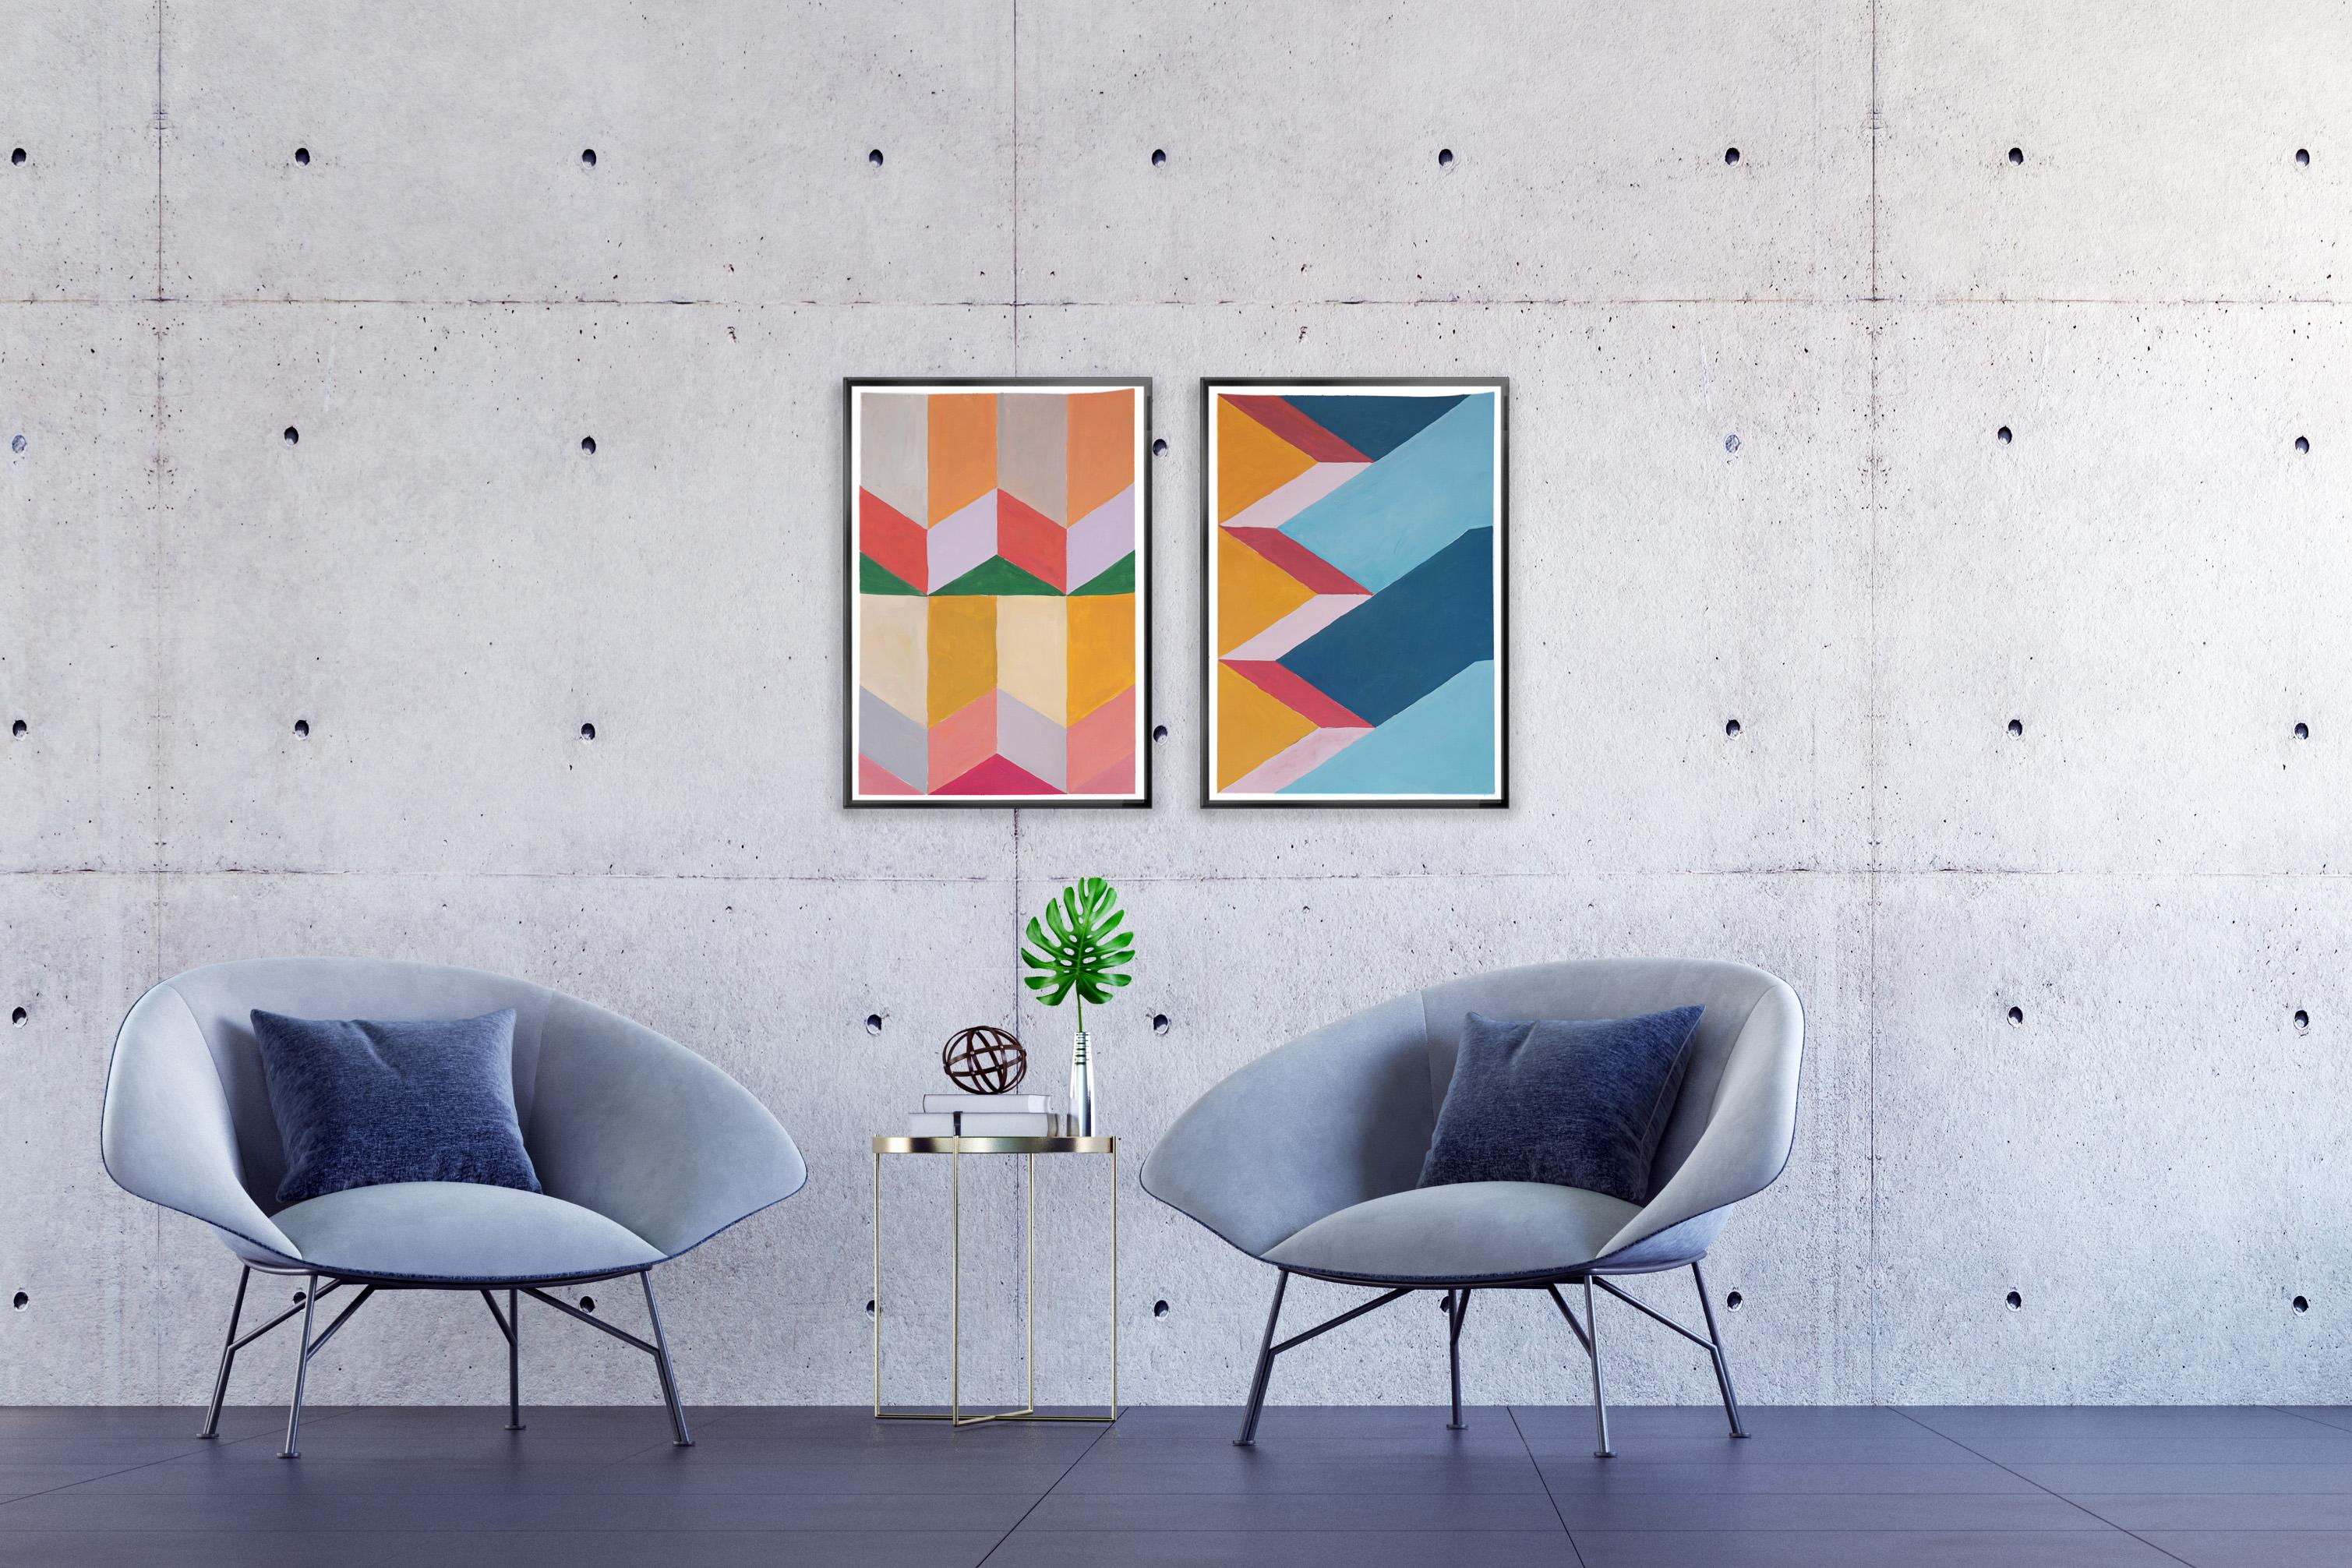 Geometric Coloured Dunes Over Sky, Bauhaus Pattern Diptych, Pastel Coral, Blue - Gray Landscape Painting by Natalia Roman